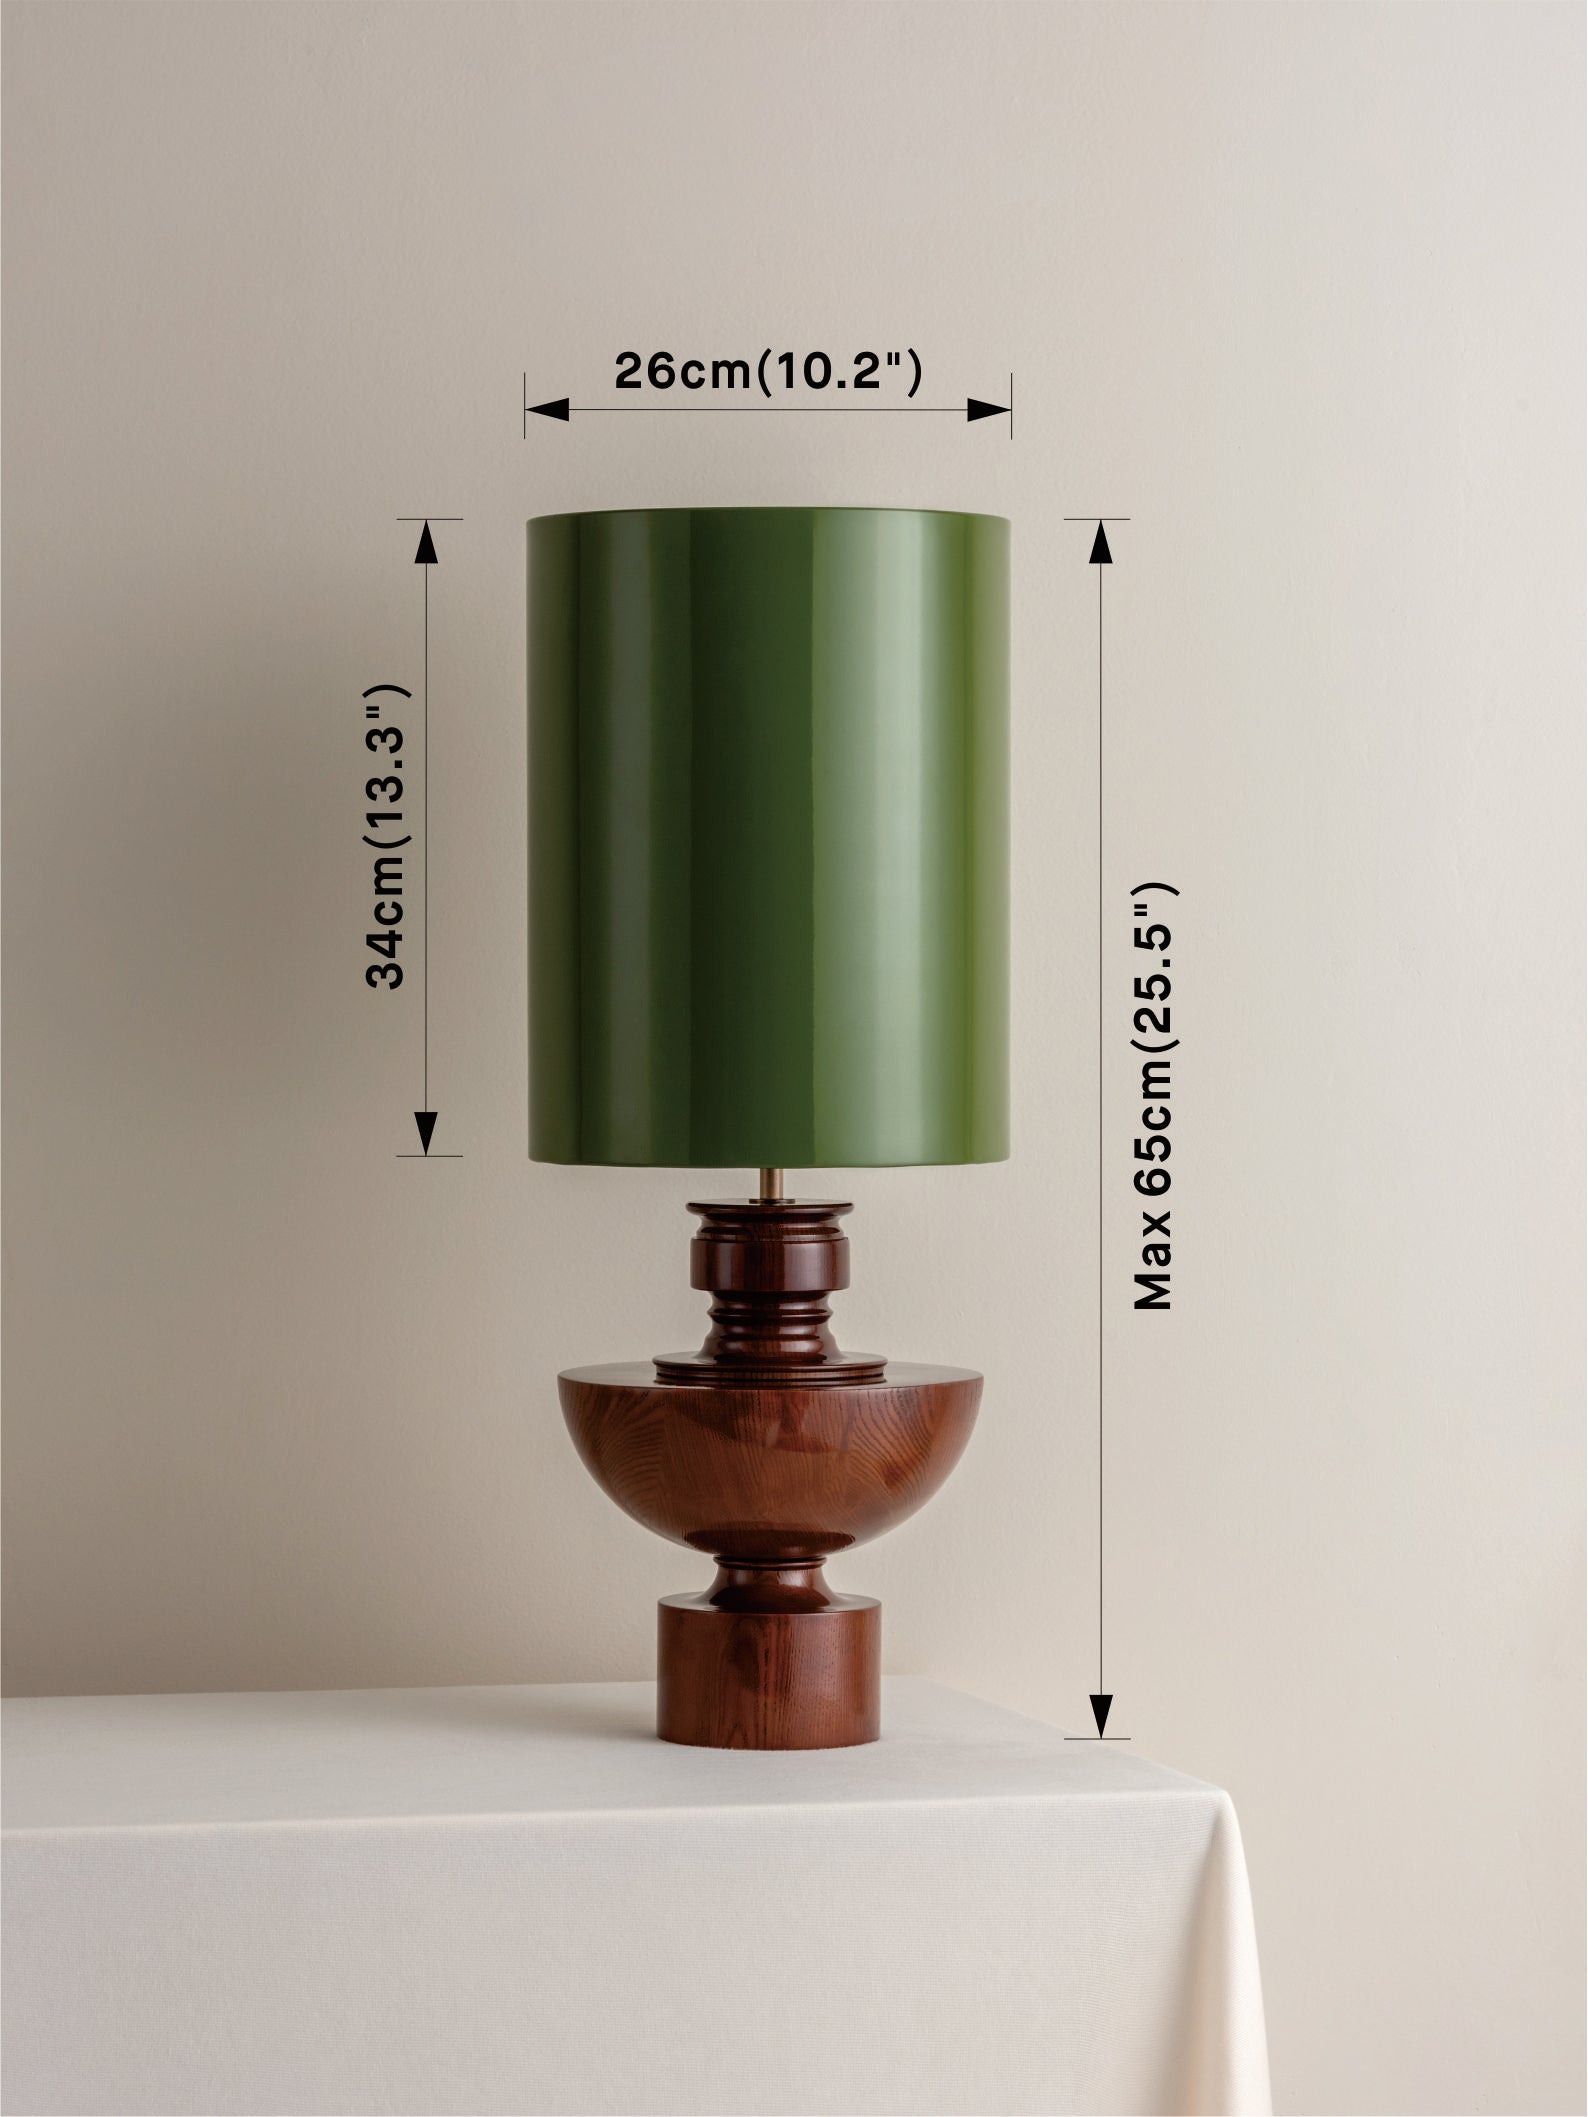 Editions spun wood lamp with + green lacquer shade | Table Lamp | Lights & Lamps | UK | Modern Affordable Designer Lighting